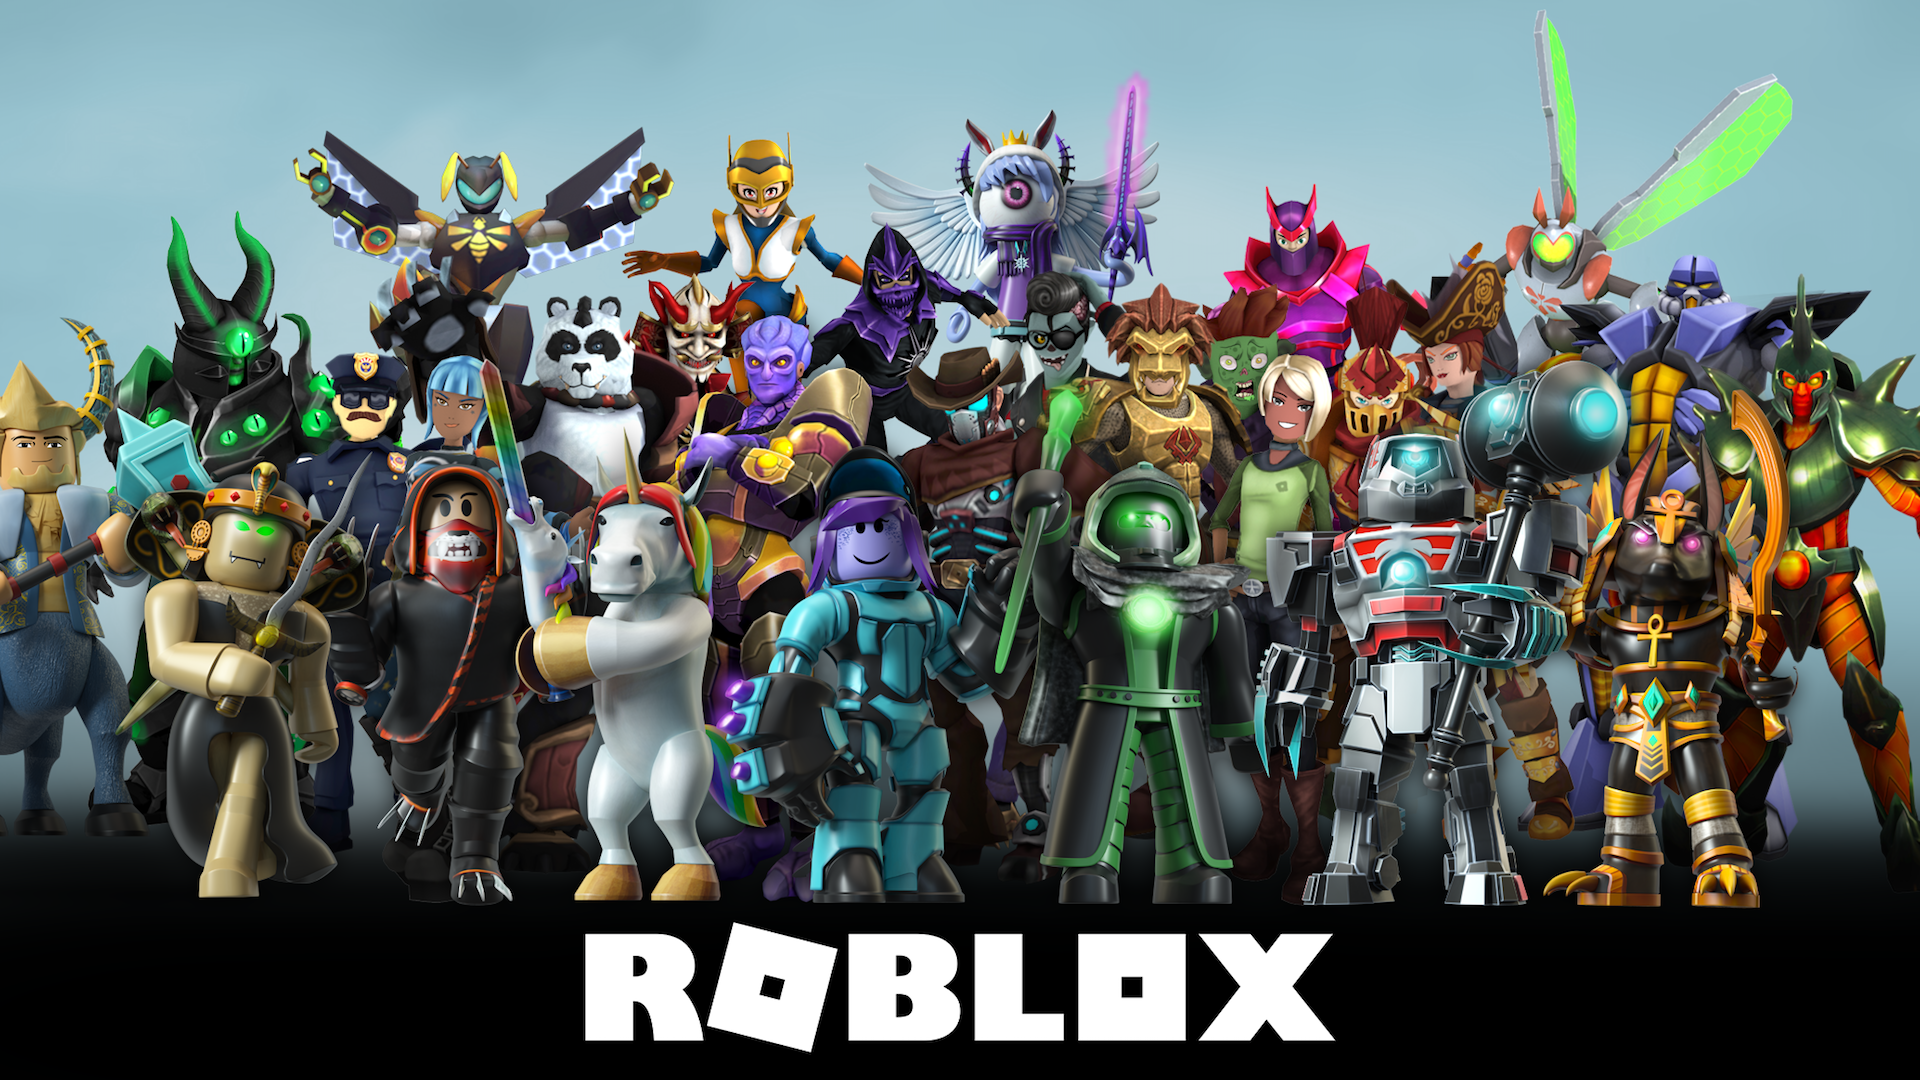 About: Roblox Wallpapers HD (Google Play version)